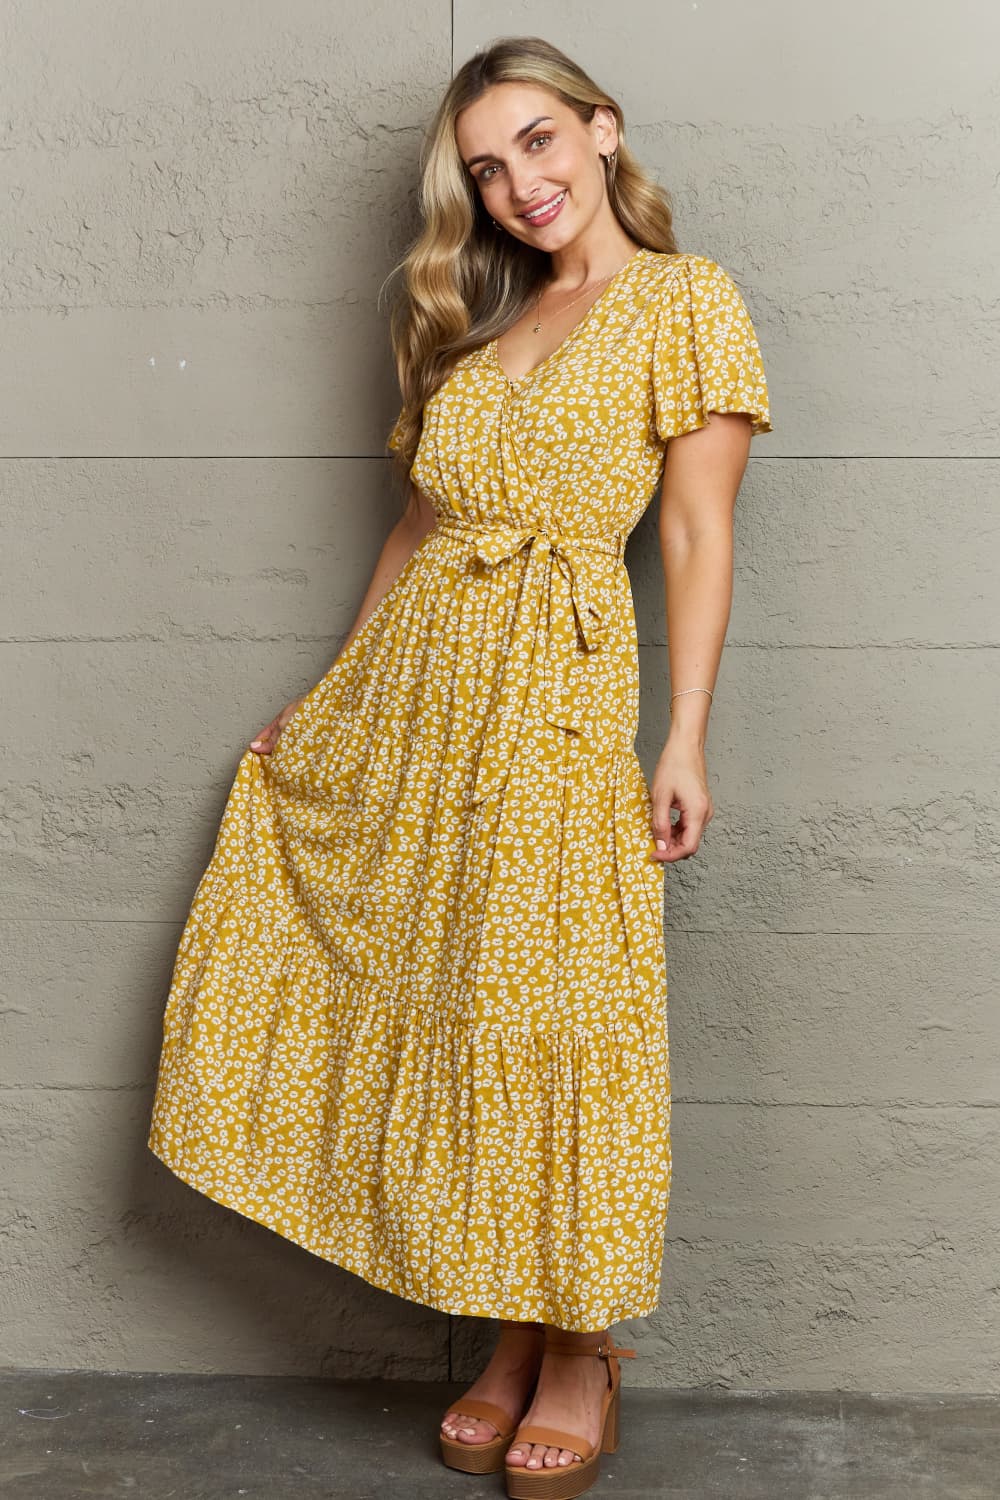 Floral Print A-Line Dress in Yellow